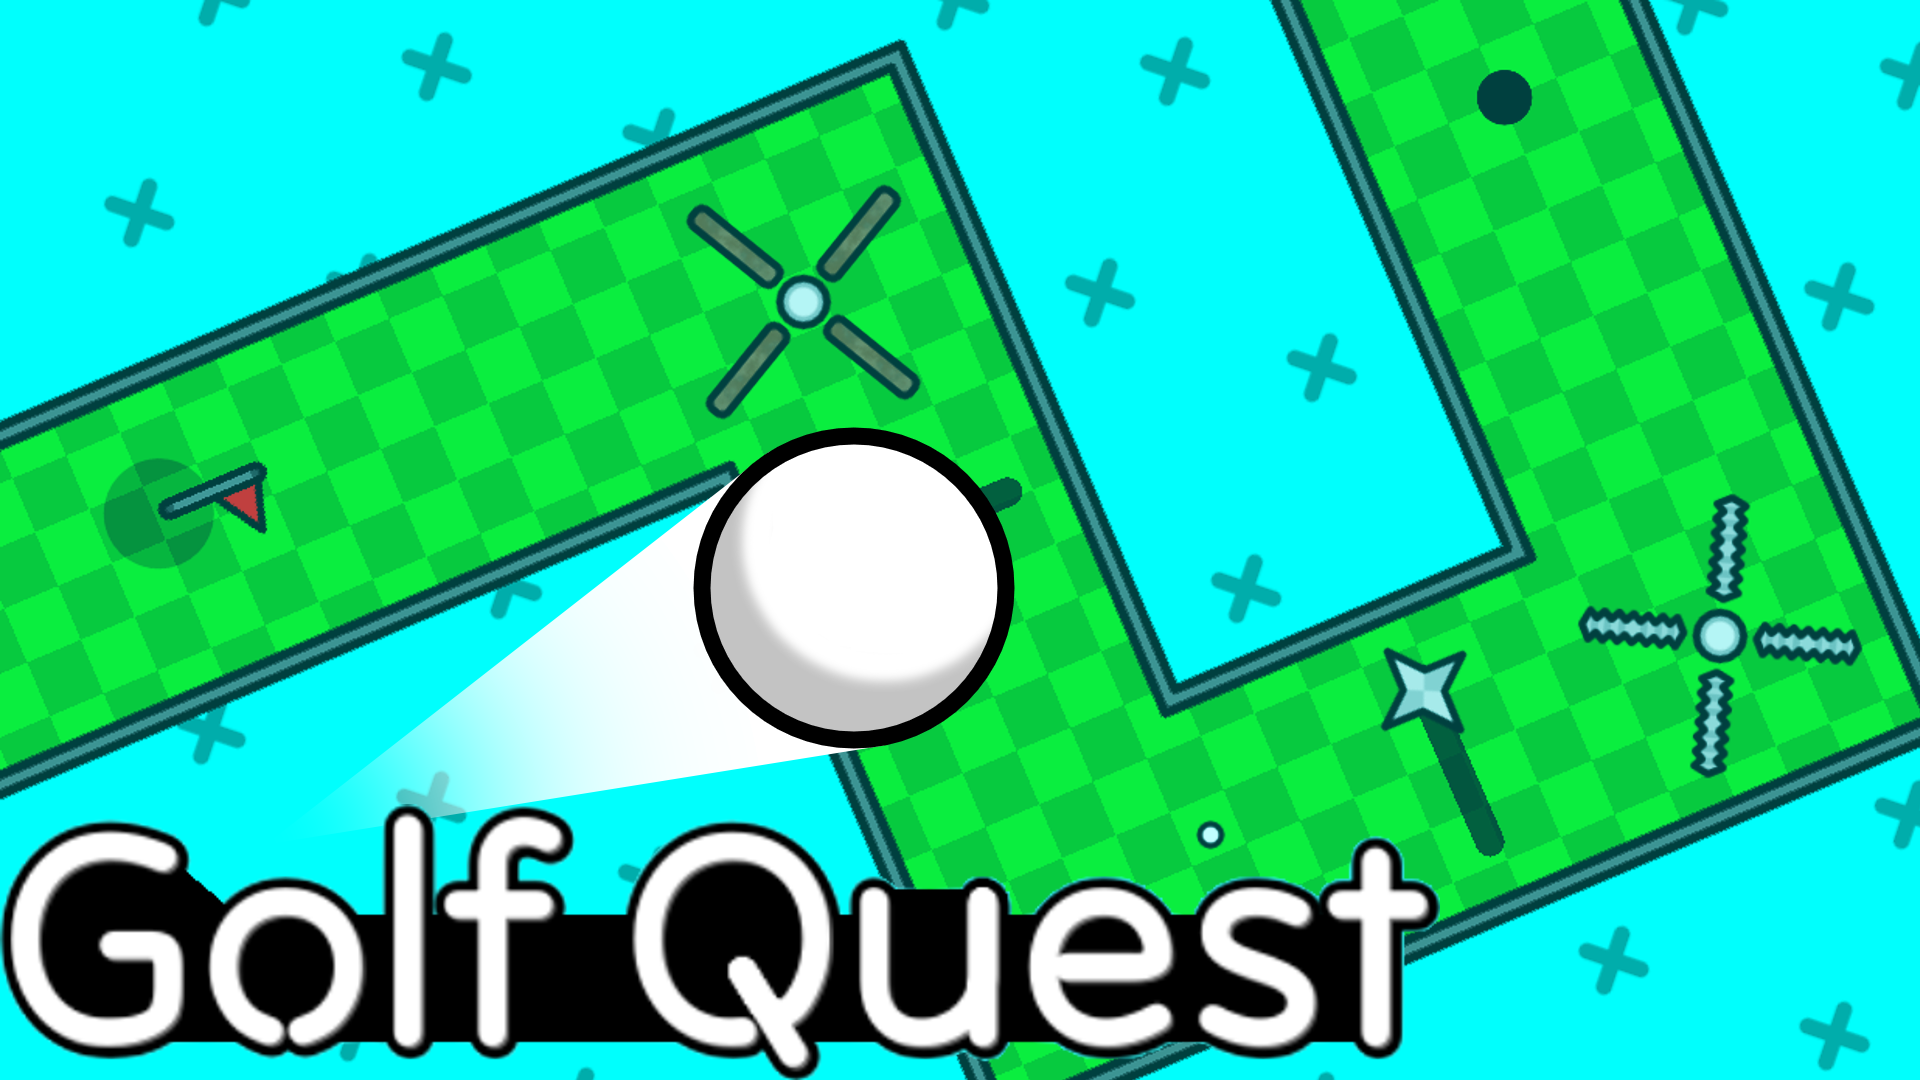 Golf Quest Game Image